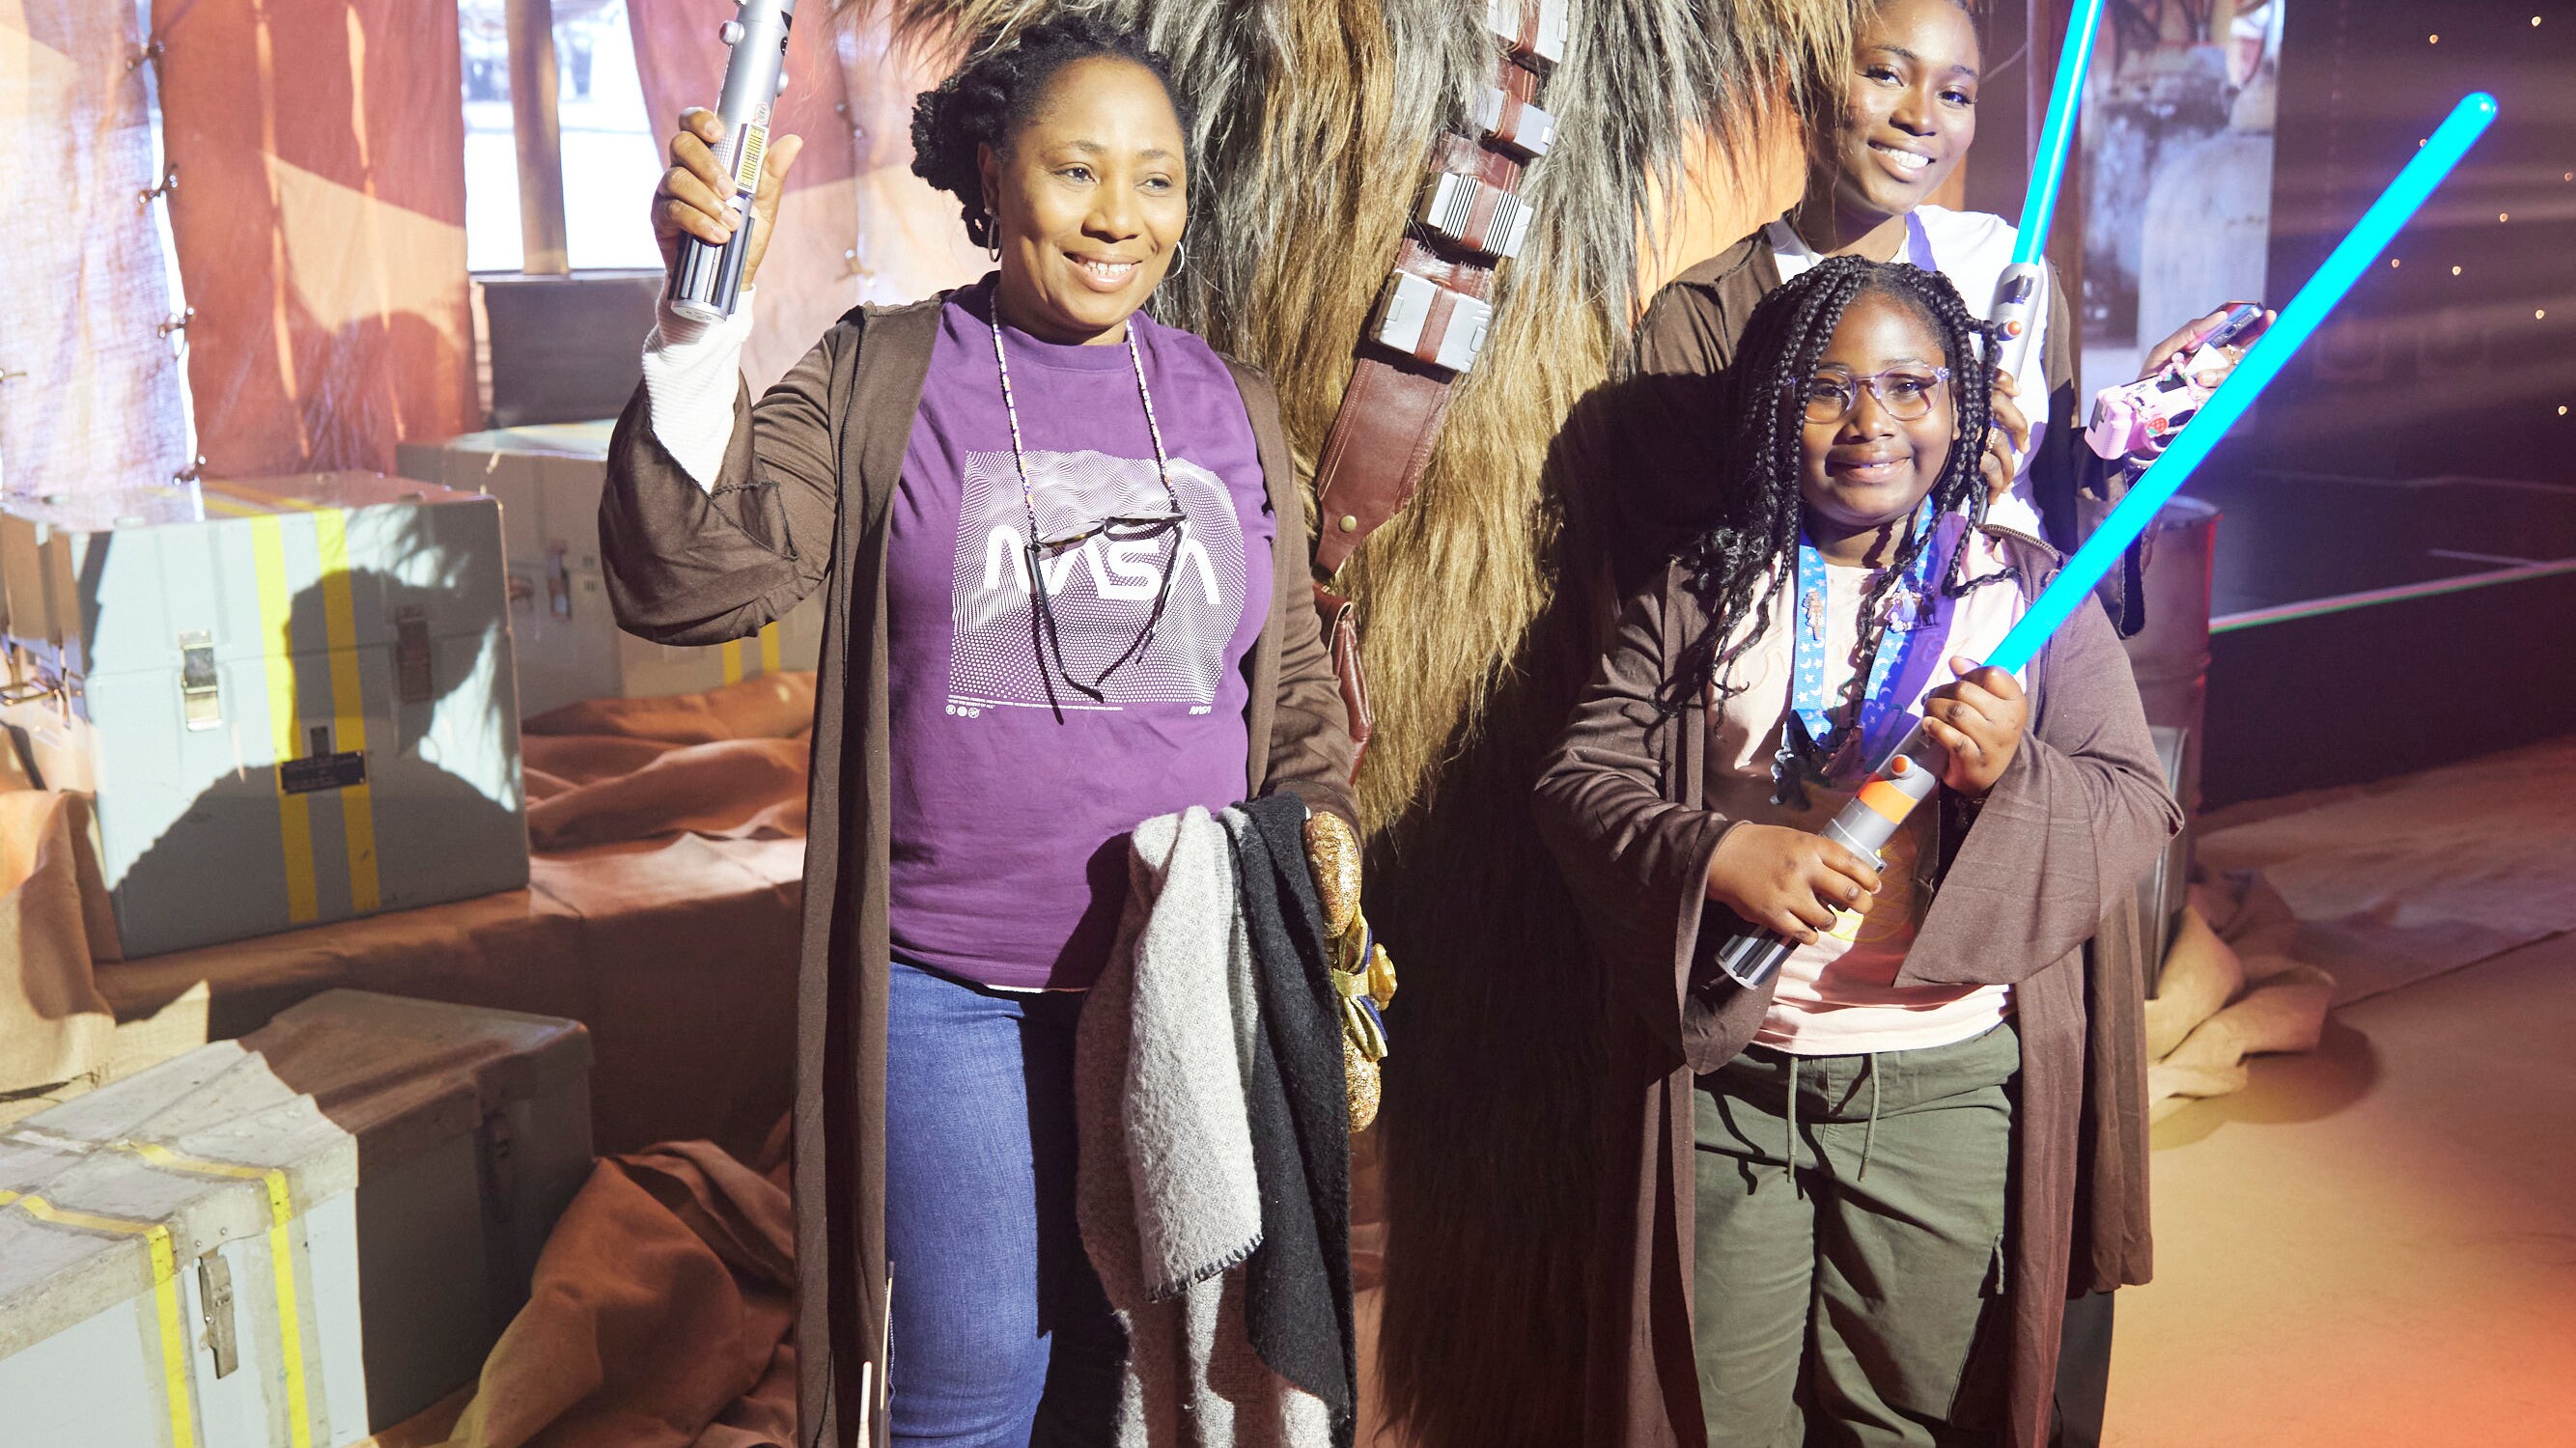 Girls posing with lightsabers posing with Star Wars' Chewbacca and BB-8 